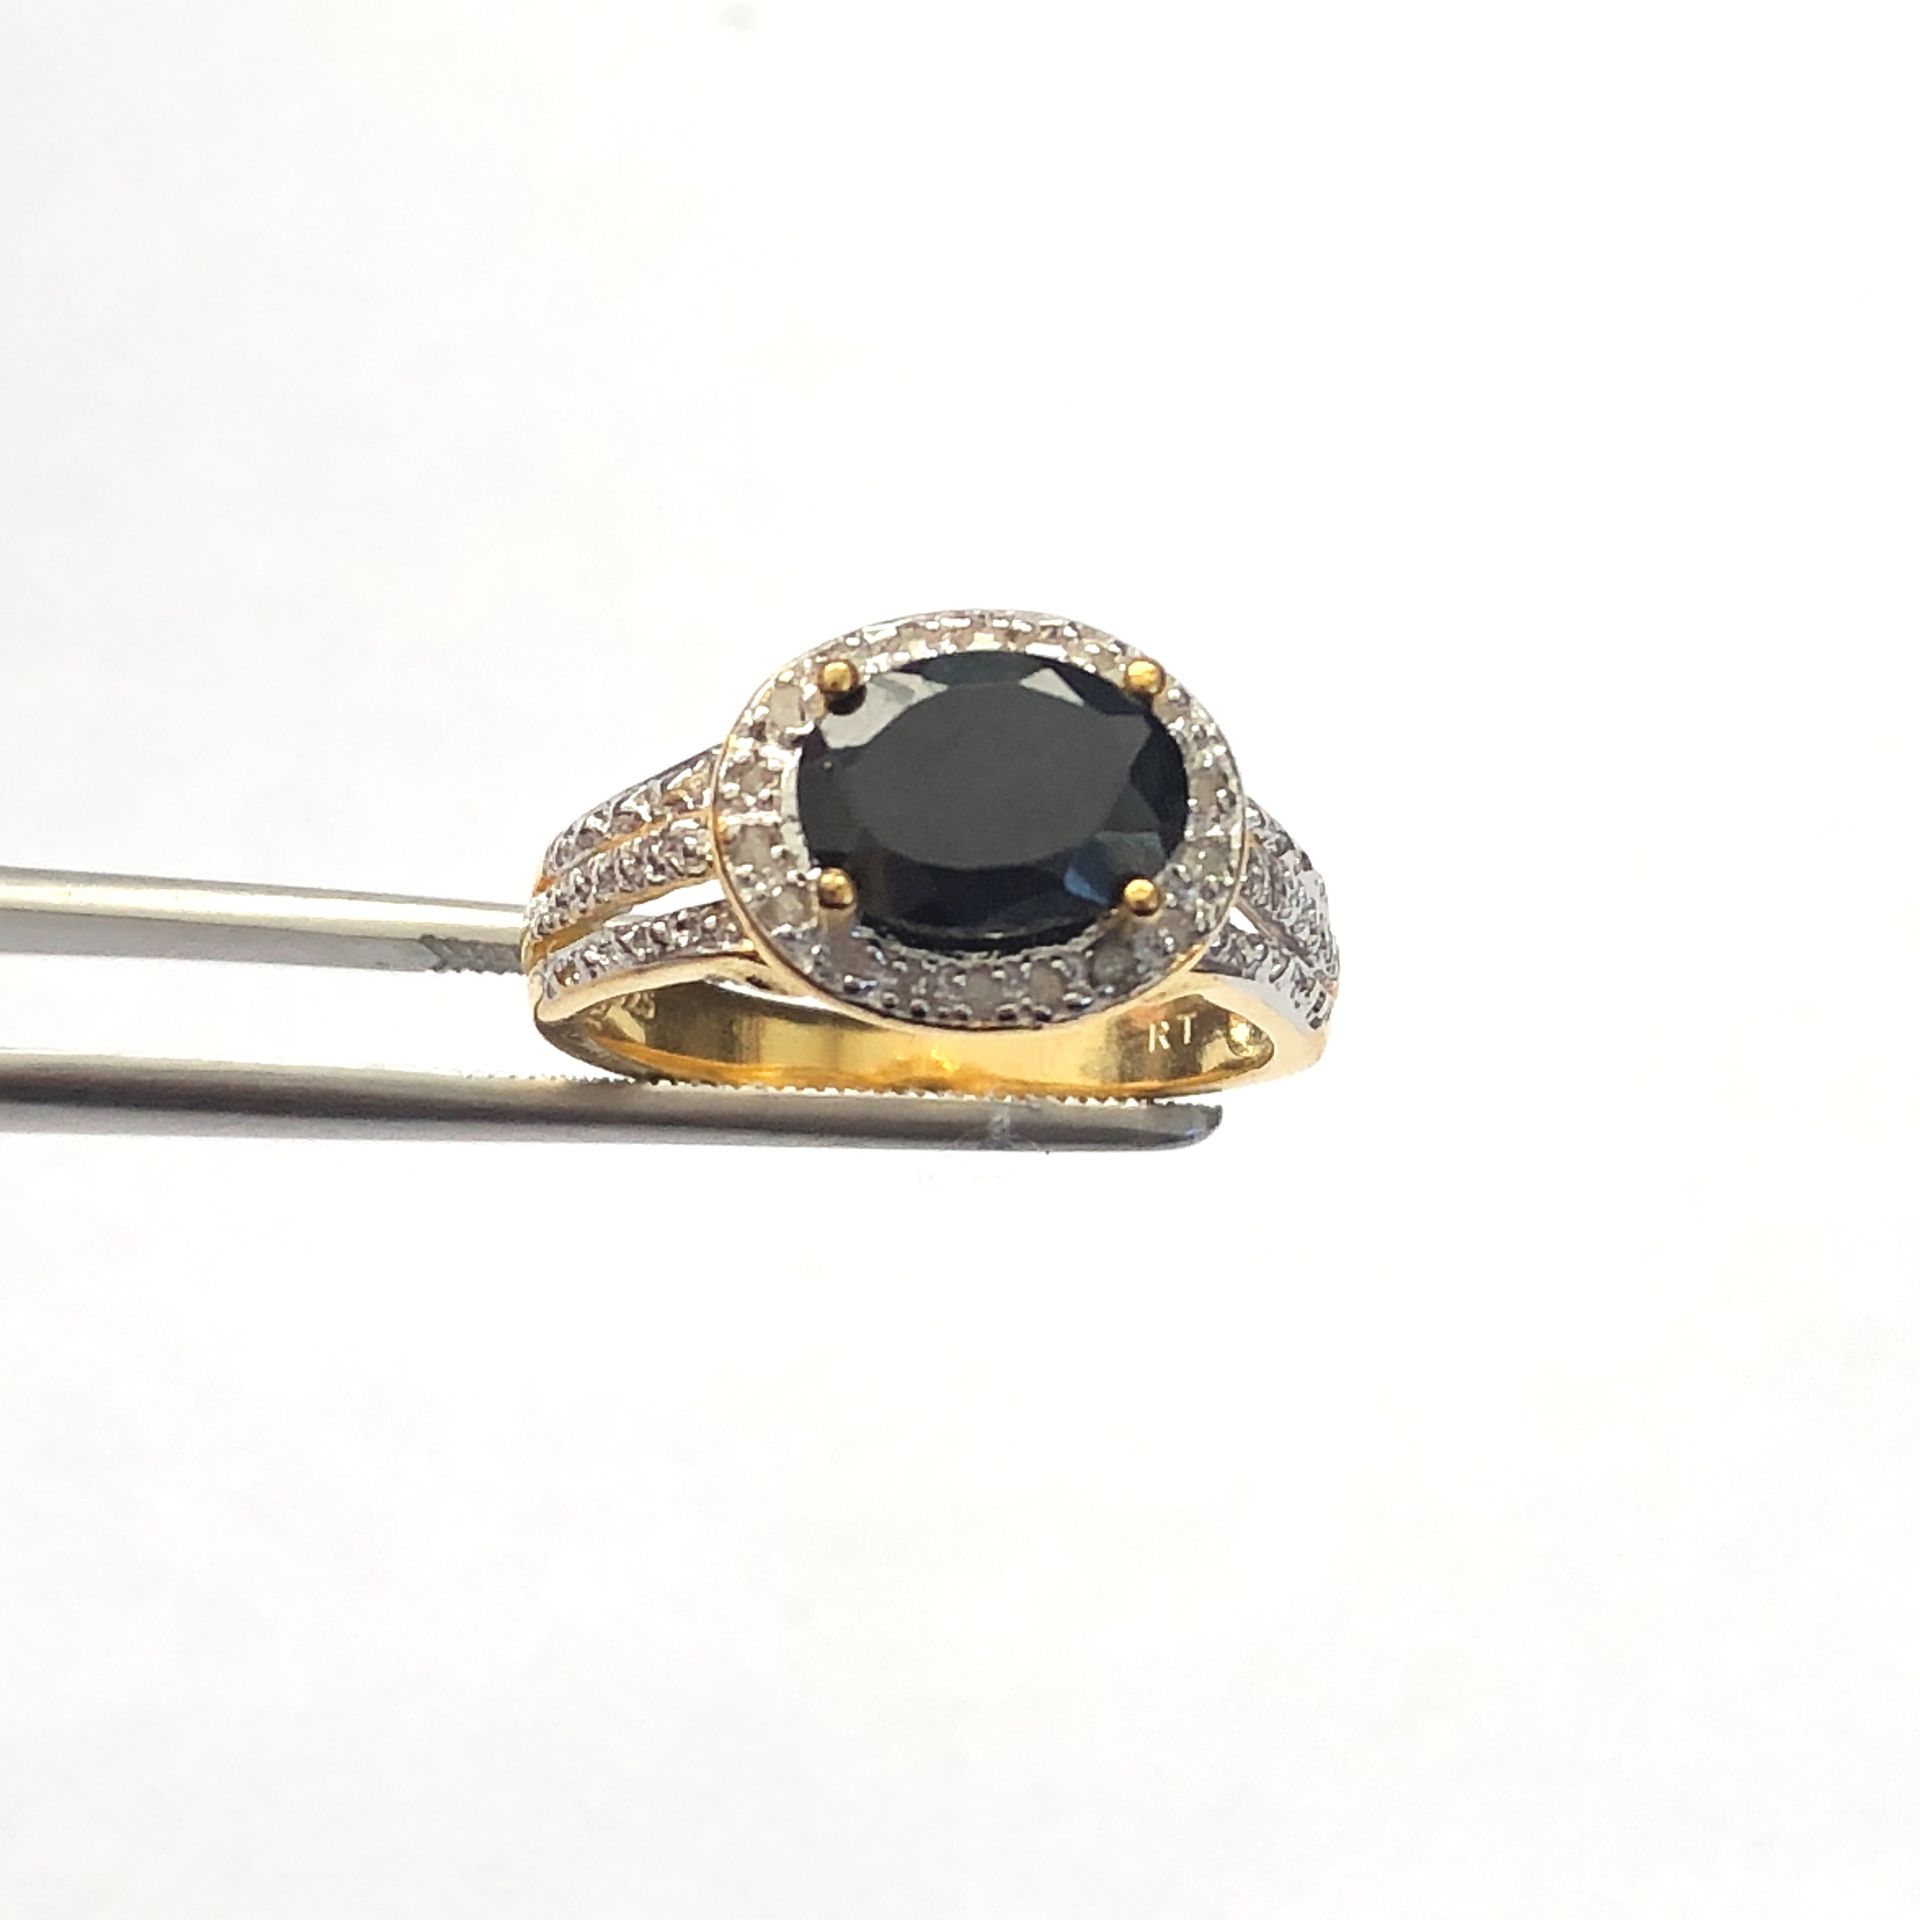 18k gold over sterling silver, black sapphire and diamond ring - Image 2 of 2